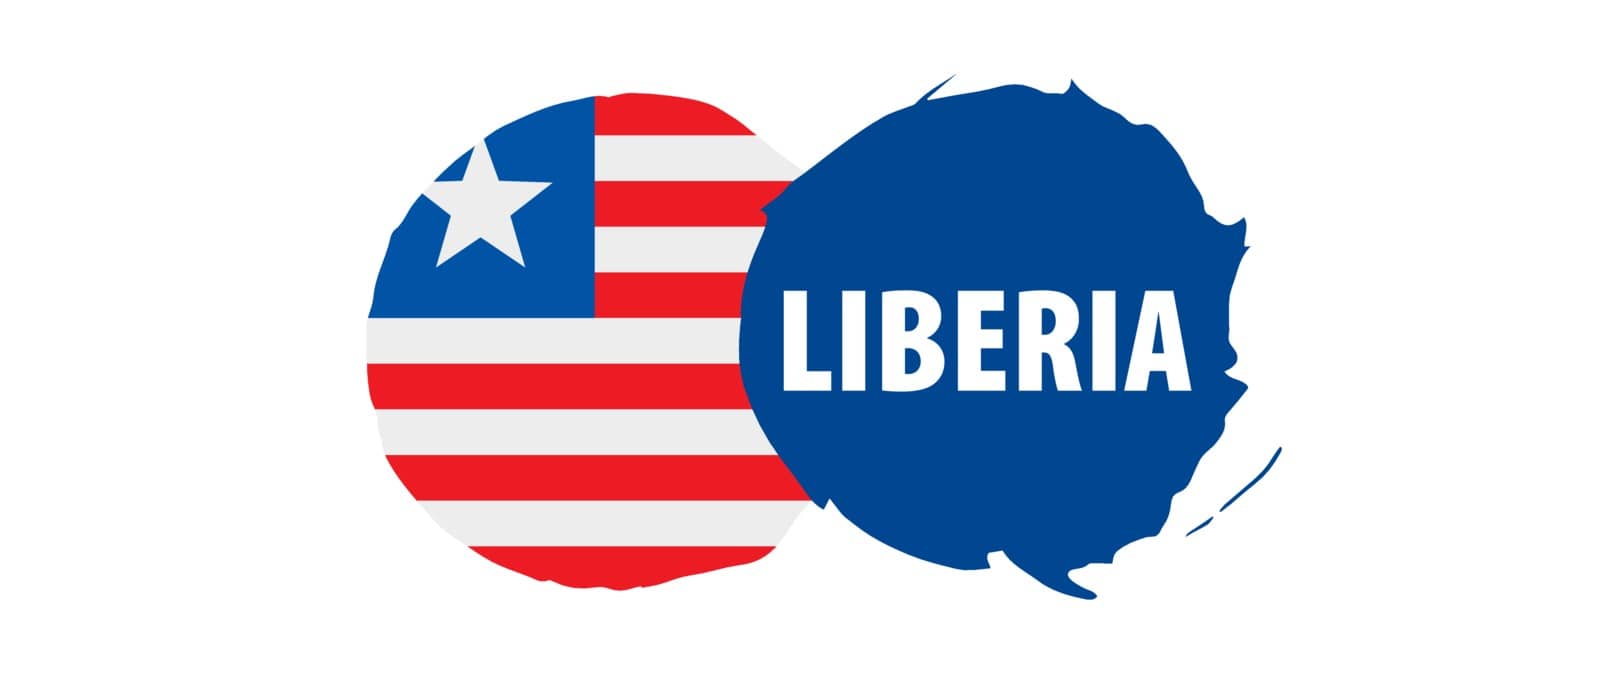 Liberia flag, vector illustration on a white background. by butenkow